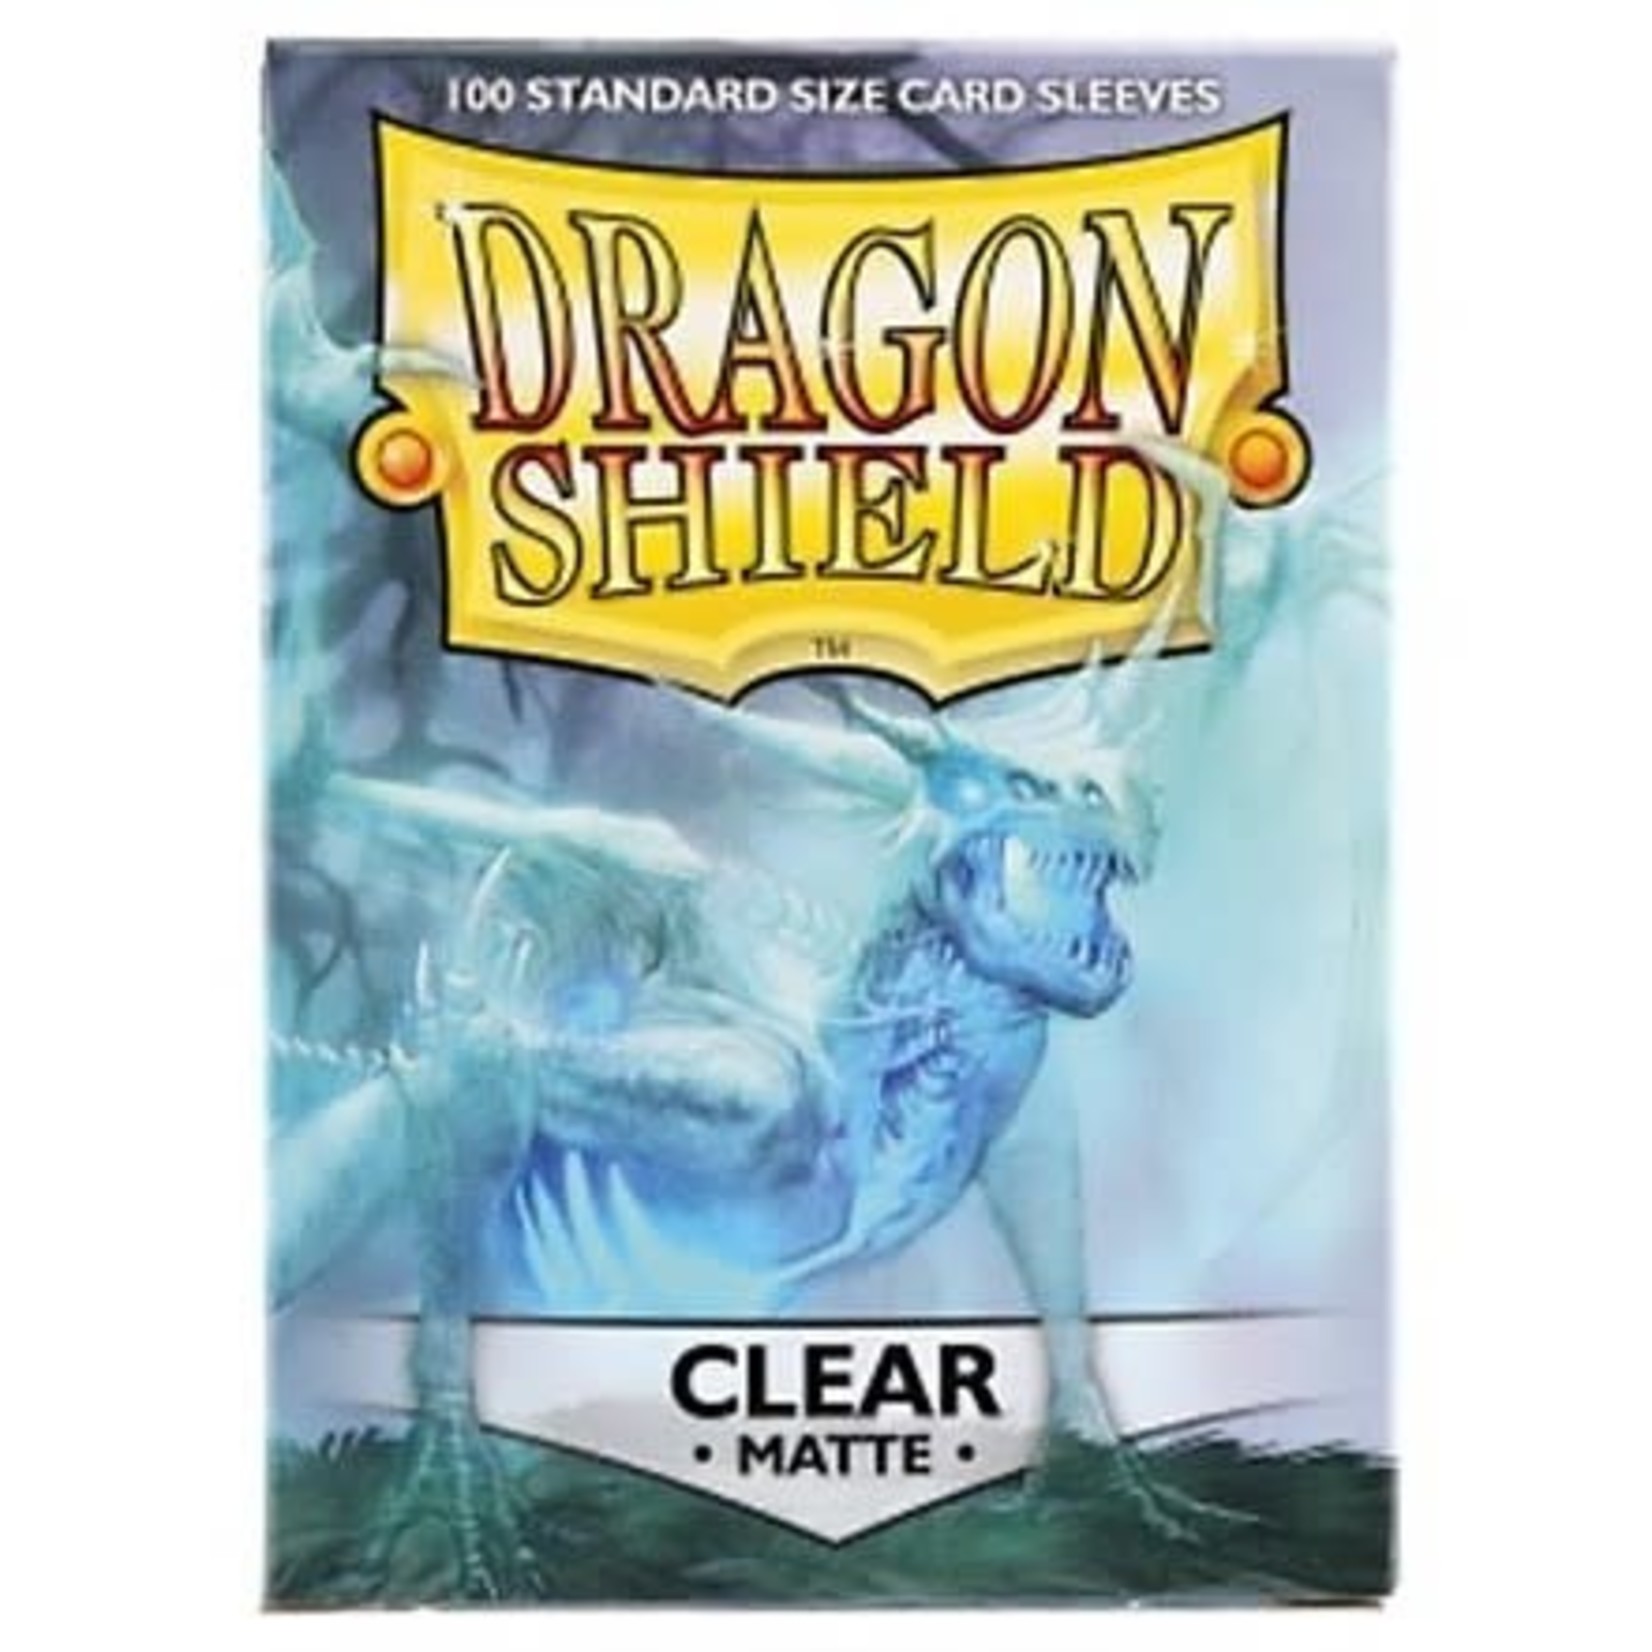 Dragon Shield Card Sleeves: Matte Clear (100 Count)